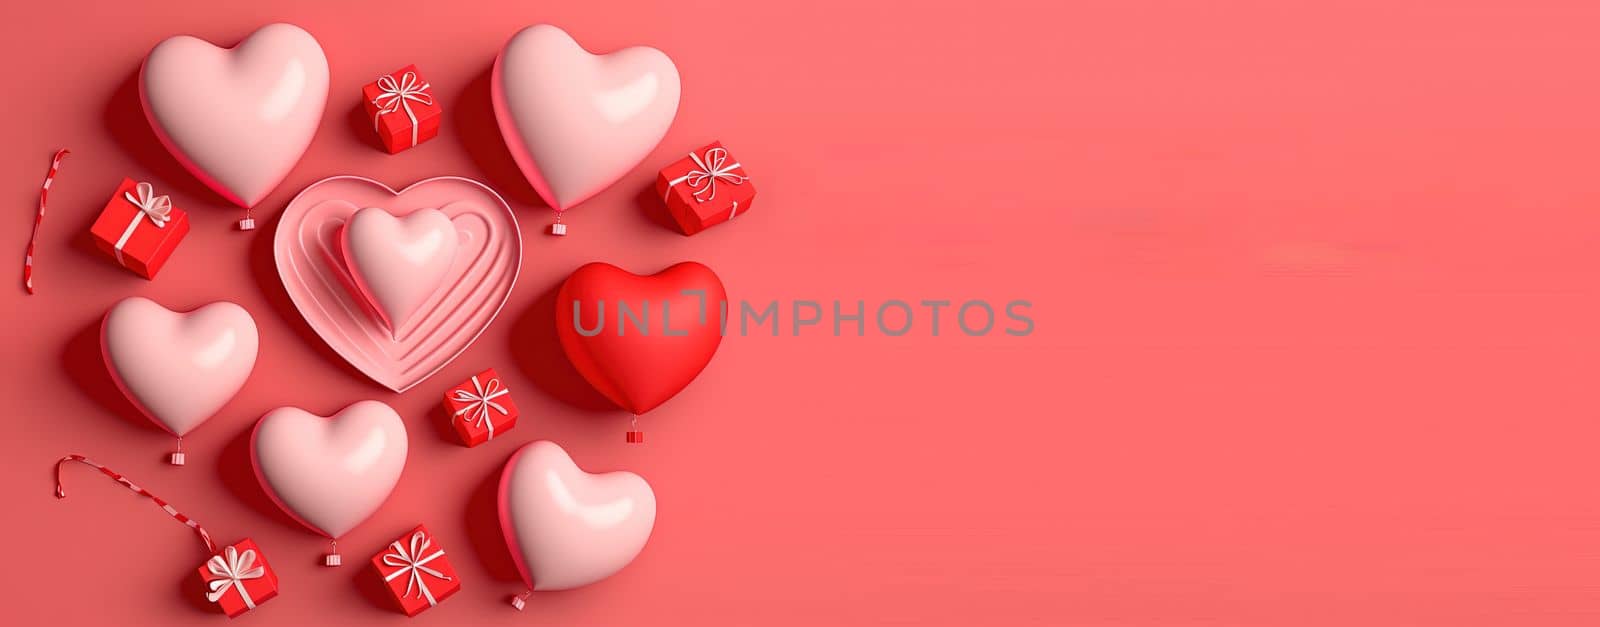 Valentine's day background and shiny 3d heart shape with small ornament for banner by templator